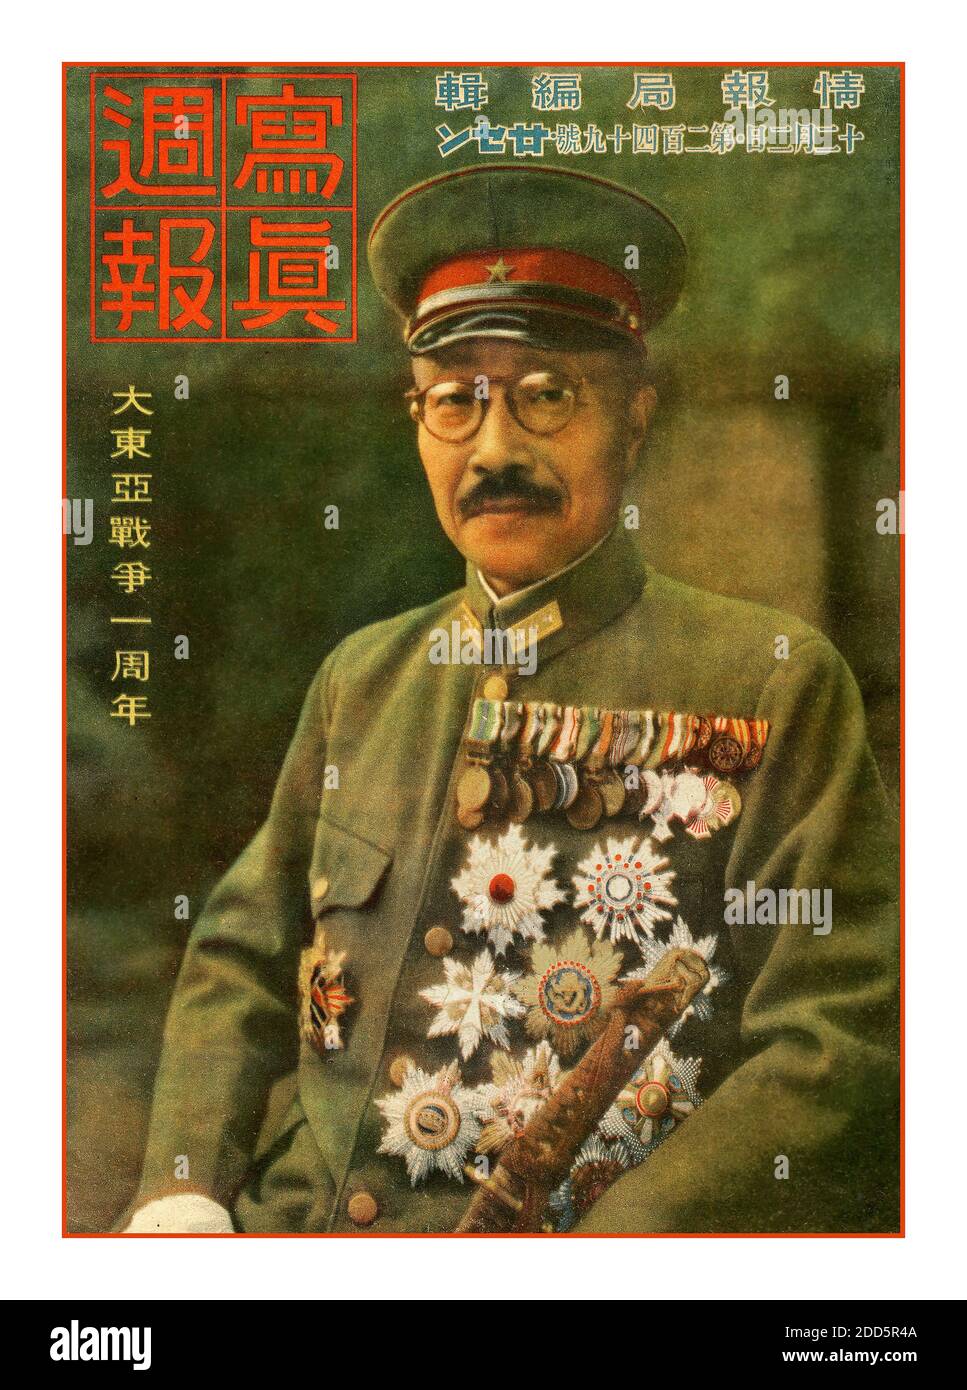 TOJO WW2 Japan Vintage 1940's Japanese Propaganda Magazine cover featuring Hideki Tojo, Prime Minister of Japan, executed in 1948 for multiple atrocities and war crimes. Illustration Shashin Shuho No 249 (December 2, 1942), First Anniversary of the Great East Asia War. Prime Minister Hideki Tojo in his military uniform Stock Photo